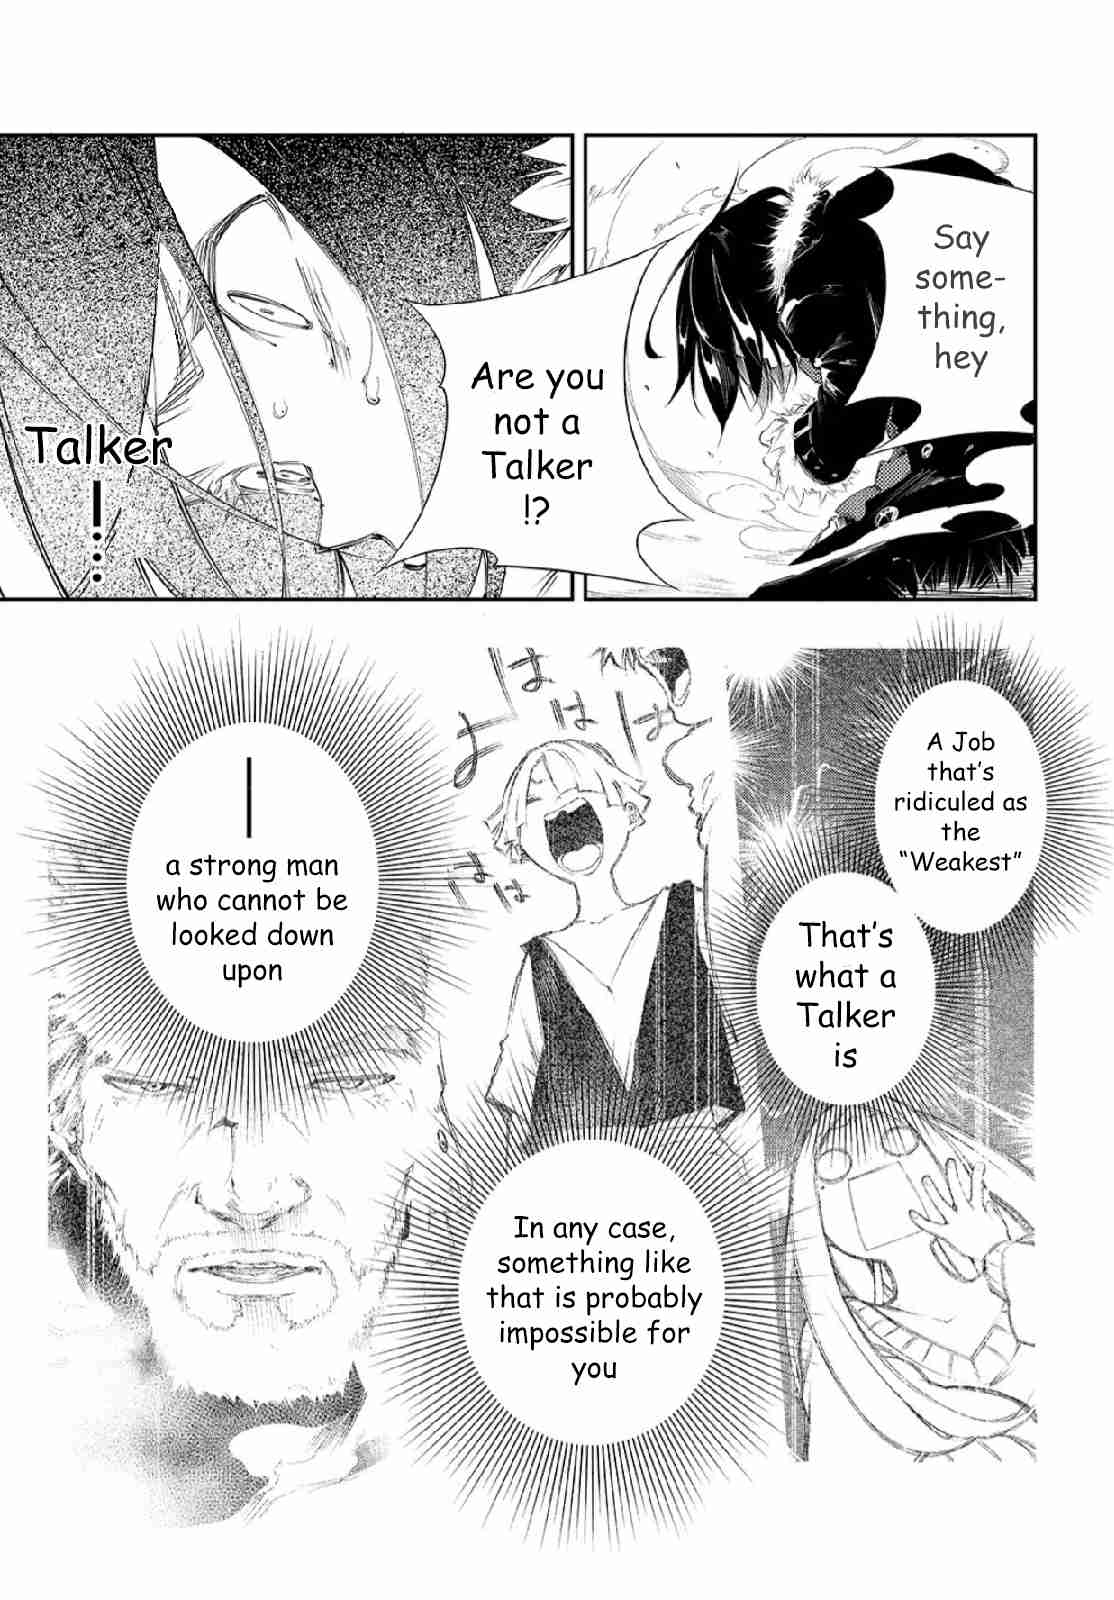 The Most Notorious "Talker" Runs the World's Greatest Clan Vol. 1 Ch. 2 The Way A Talker Fights